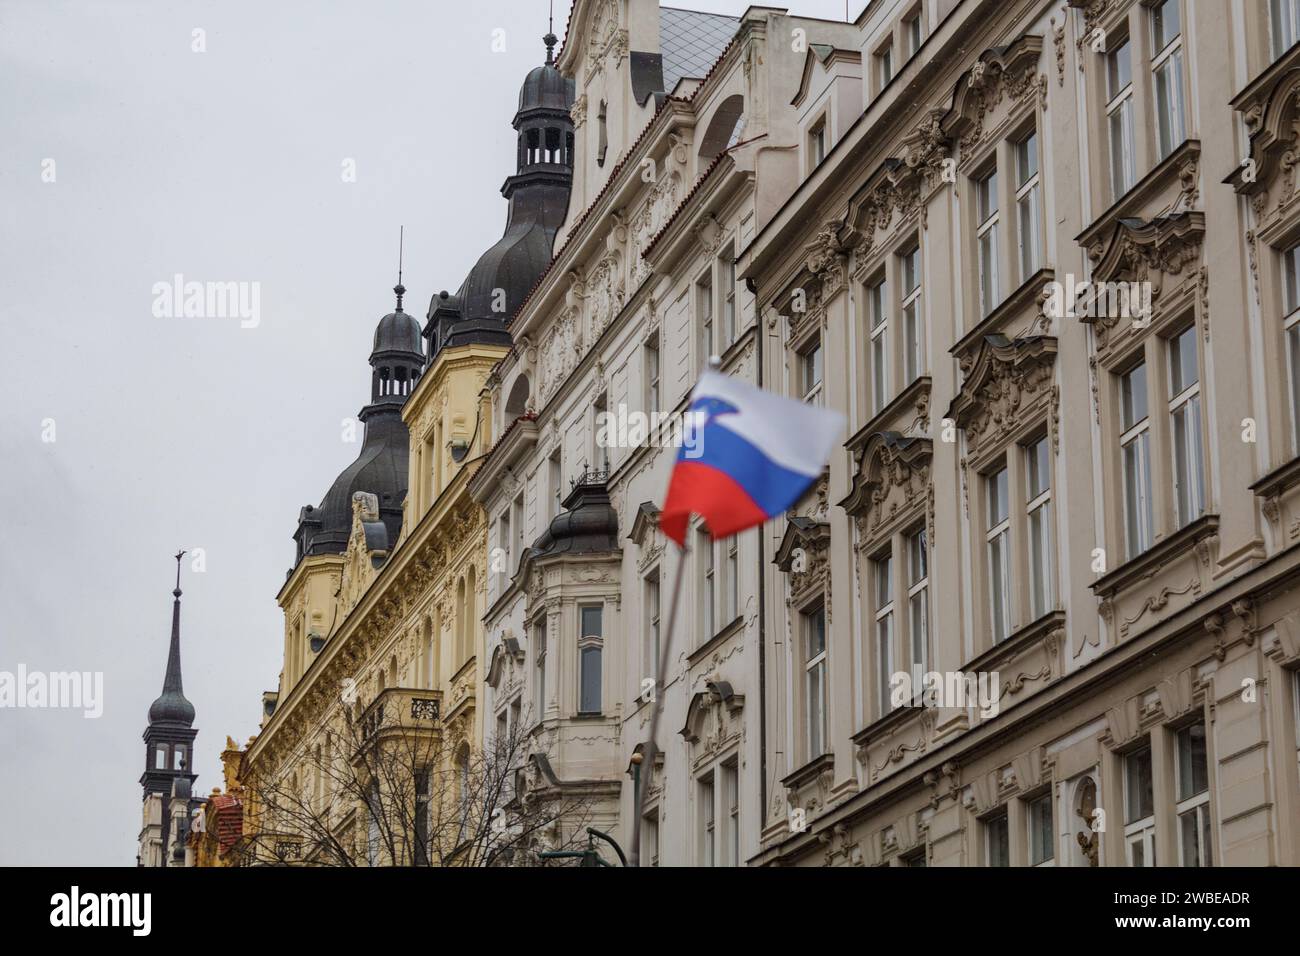 A slovenian flag in front of a historic building in Prague city on a freezing cold december day Stock Photo